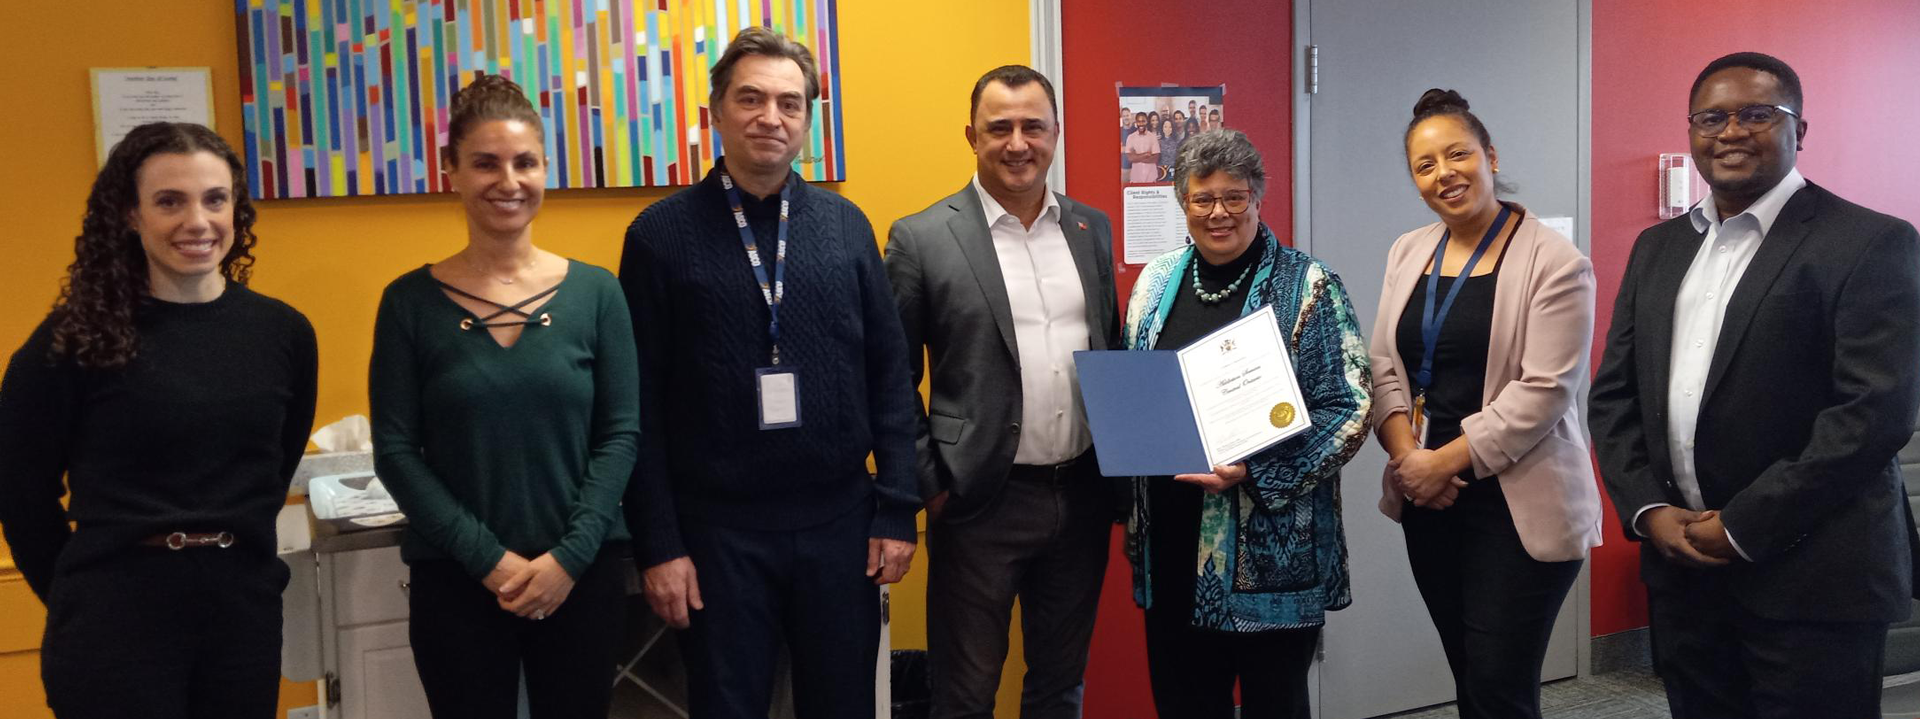 group of ASCO employees with , the Honourable Michael Parsa, Minister of Children, Community and Social Services, and MPP for Aurora—Oak Ridges—Richmond Hill